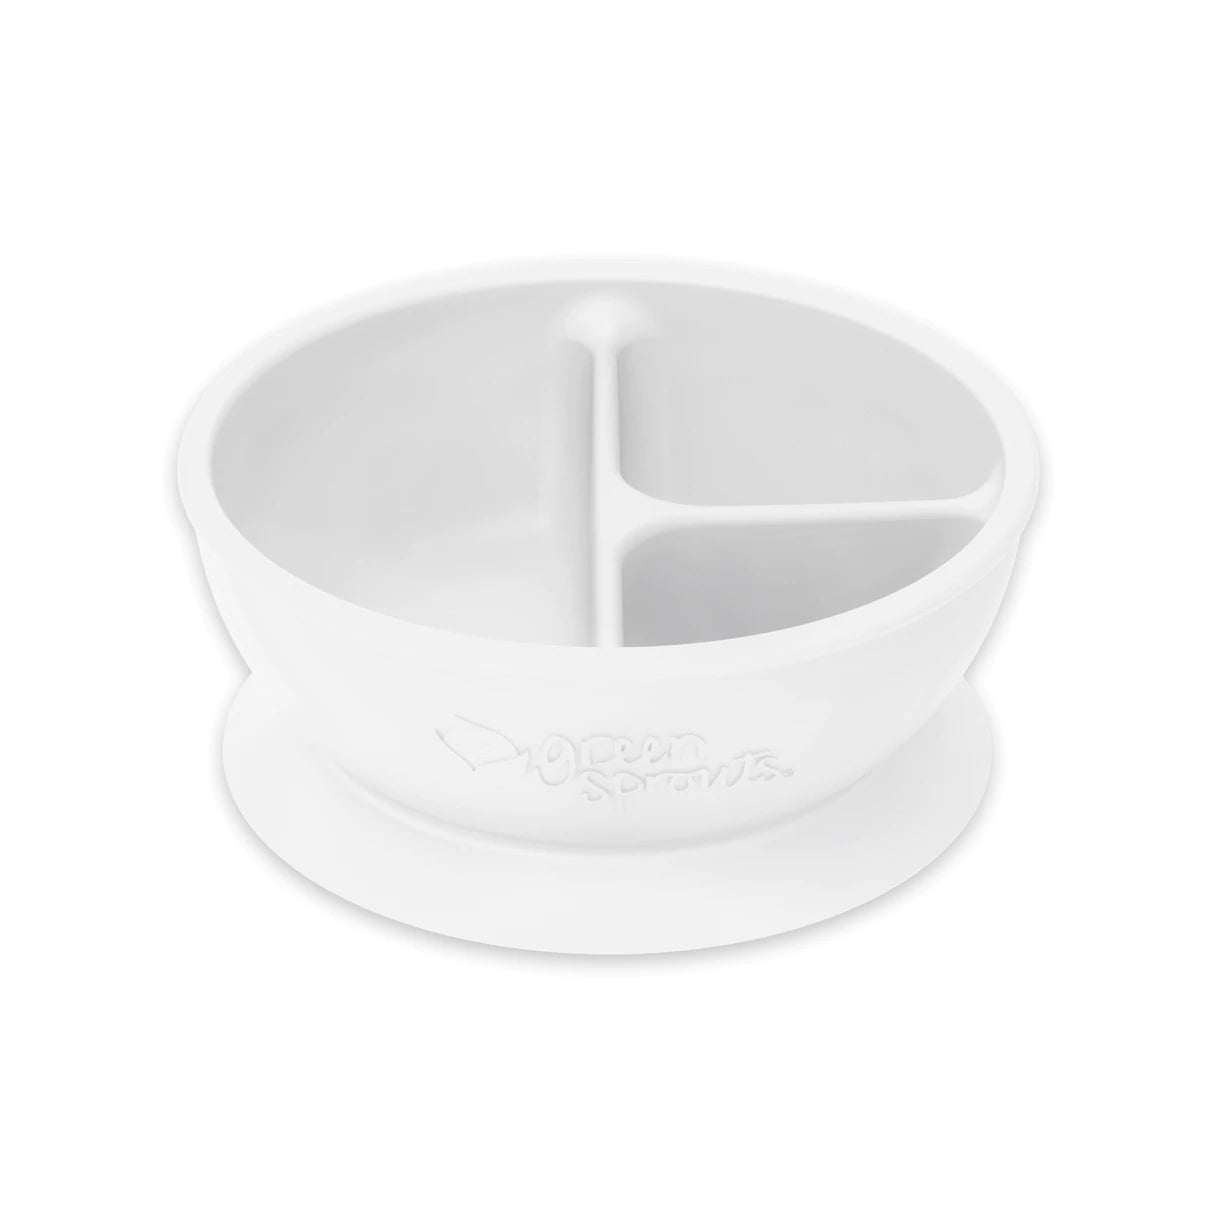 The First Years 20-Pack Value Set Take & Toss Storage Bowls